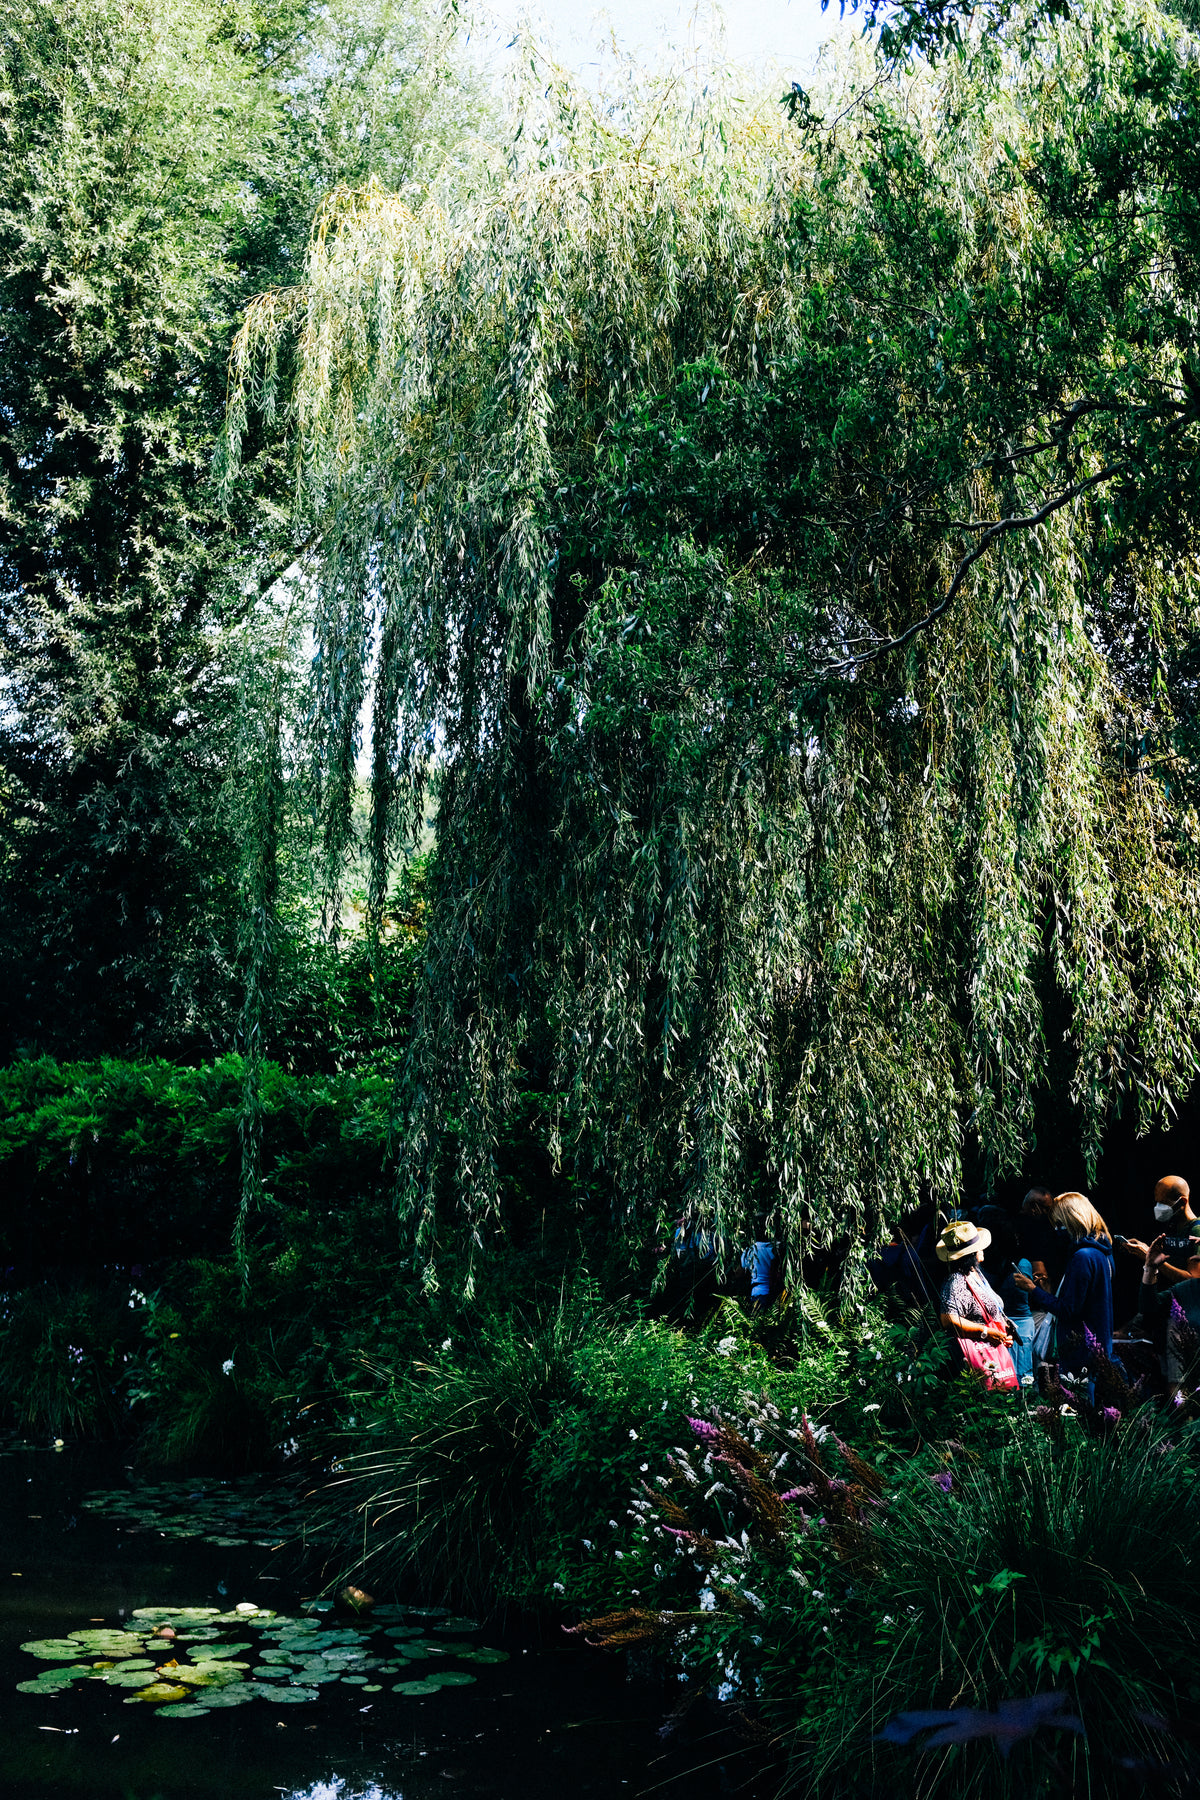 willow tree in marsh with people standing under it